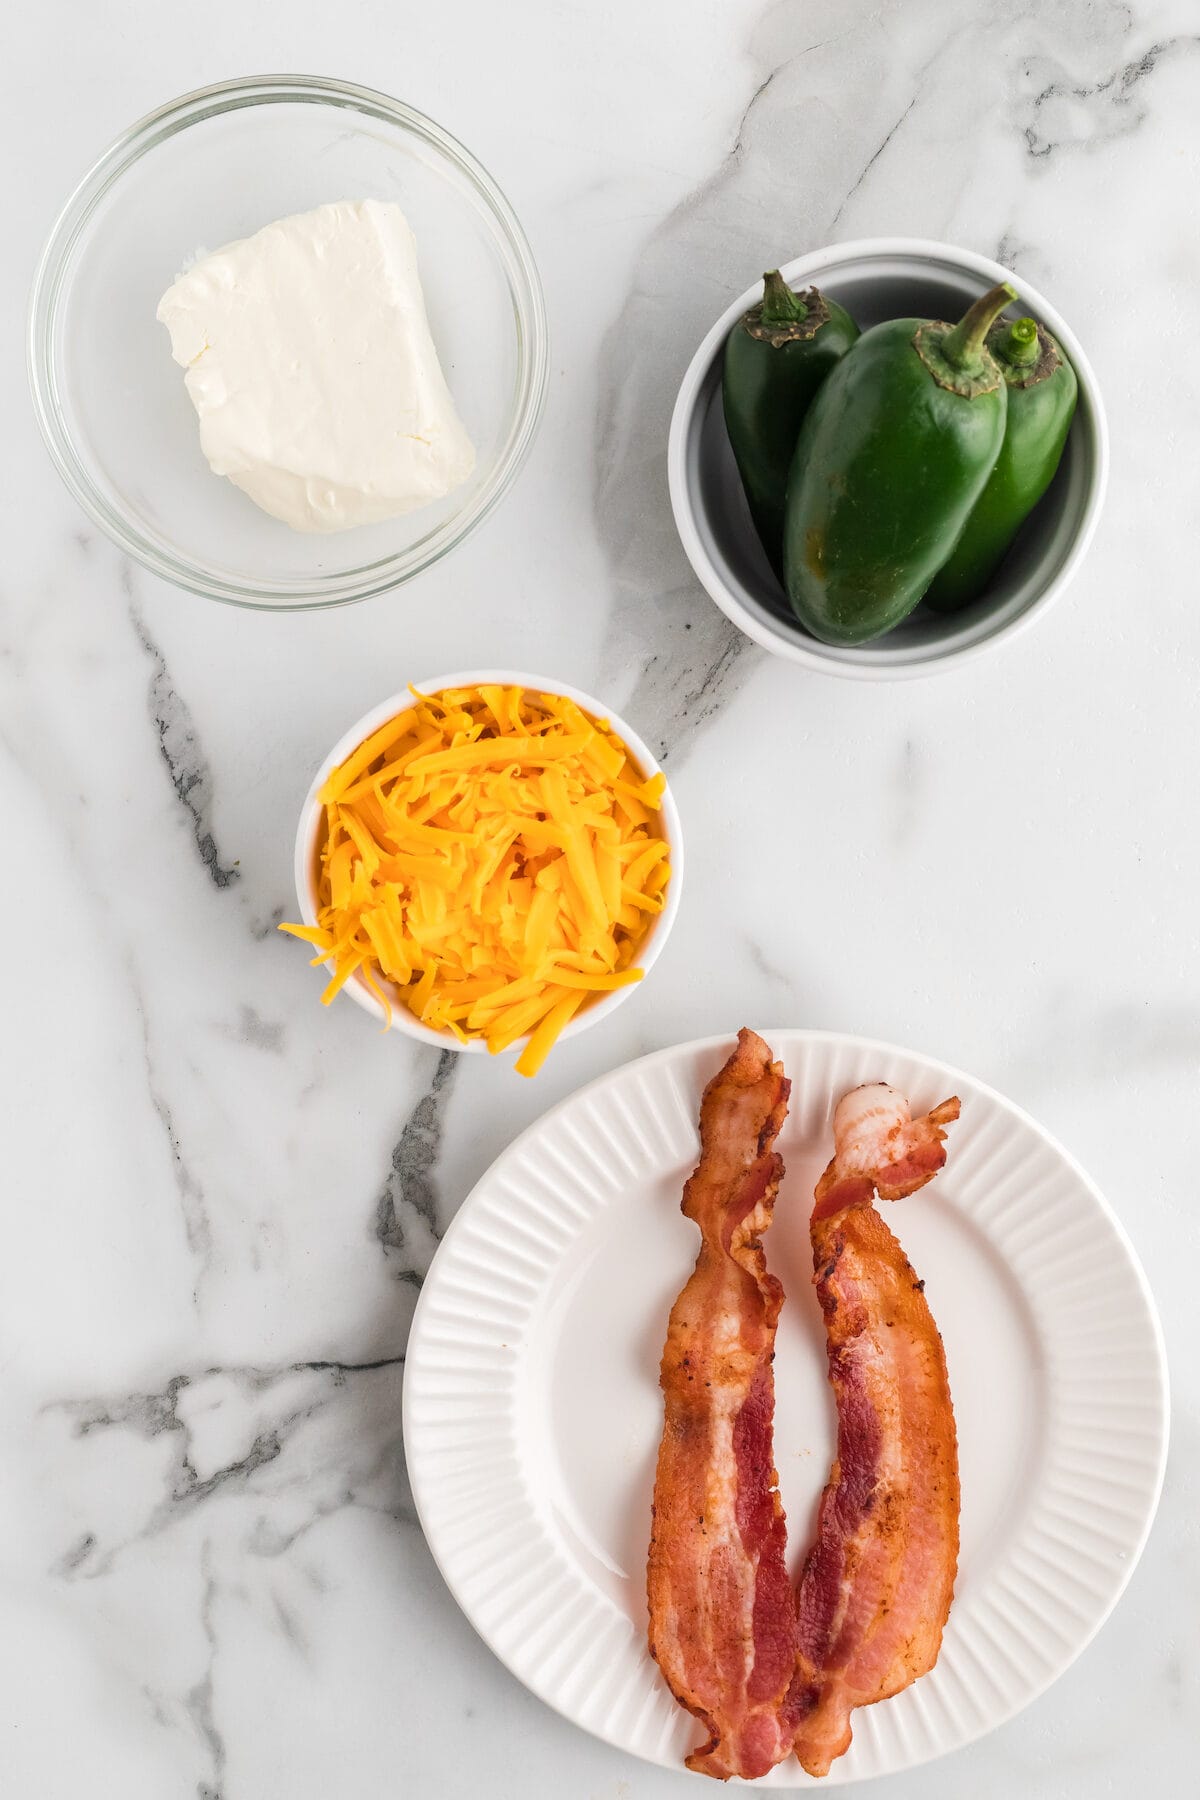 ingredients for the jalapeno poppers in small glass bowls